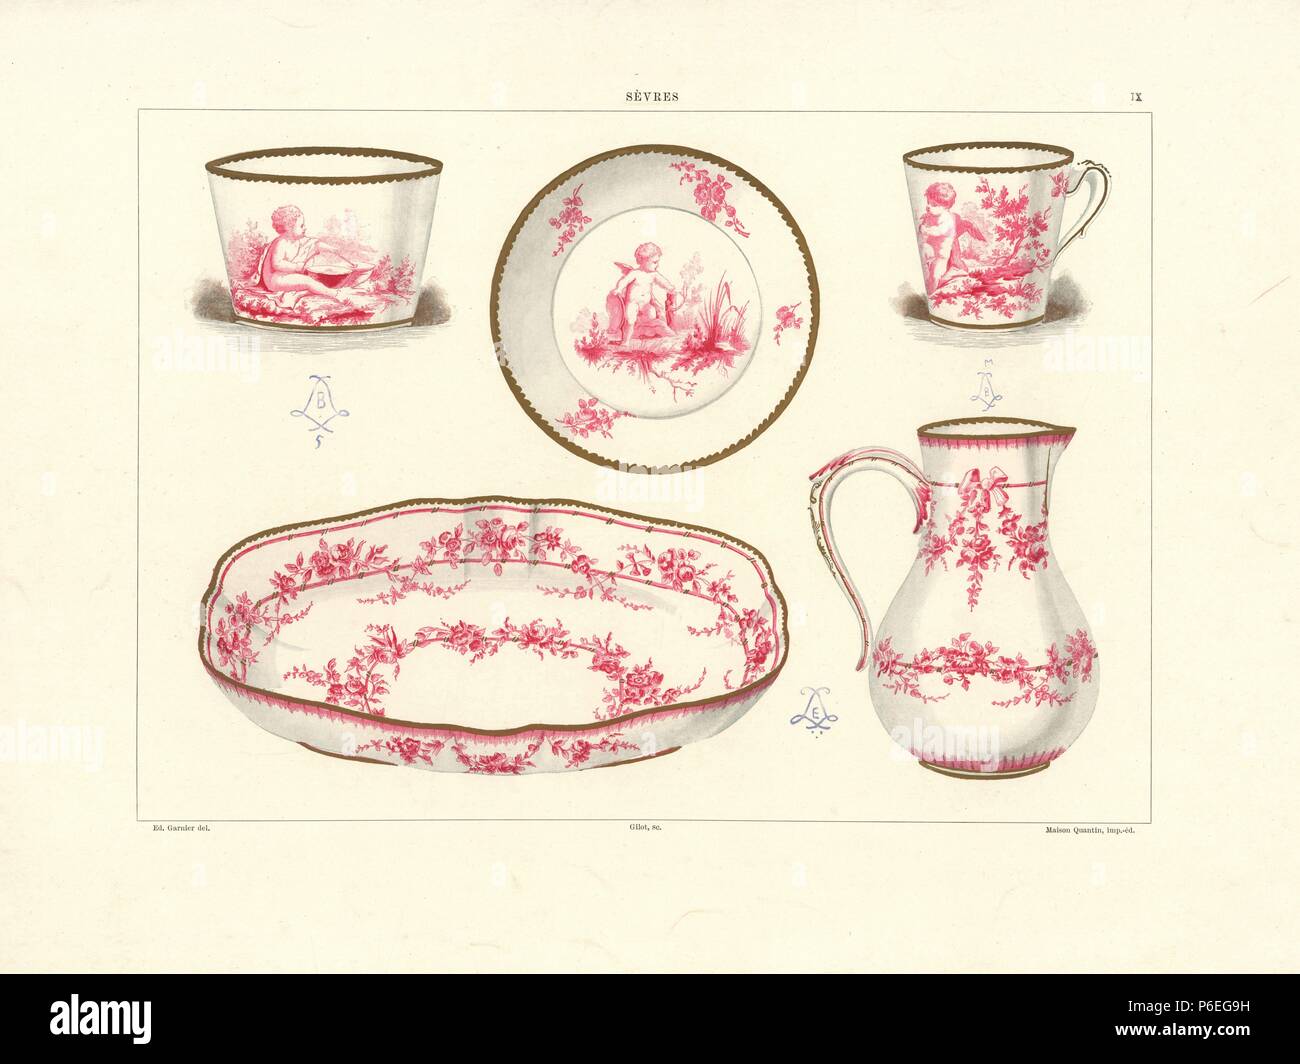 Camaieu decoration on Sevres pottery: small sugar bowl (sucrier) painted by Carrier 1754, obconic cup and saucer painted by Moiron 1754, and water jug and bowl with flowers by Tandard 1757. Chromolithograph by Gillot of an illustration by Edouard Garnier from The Soft Paste Porcelain of Sevres, Maison Quantin, Paris, 1891. Stock Photo